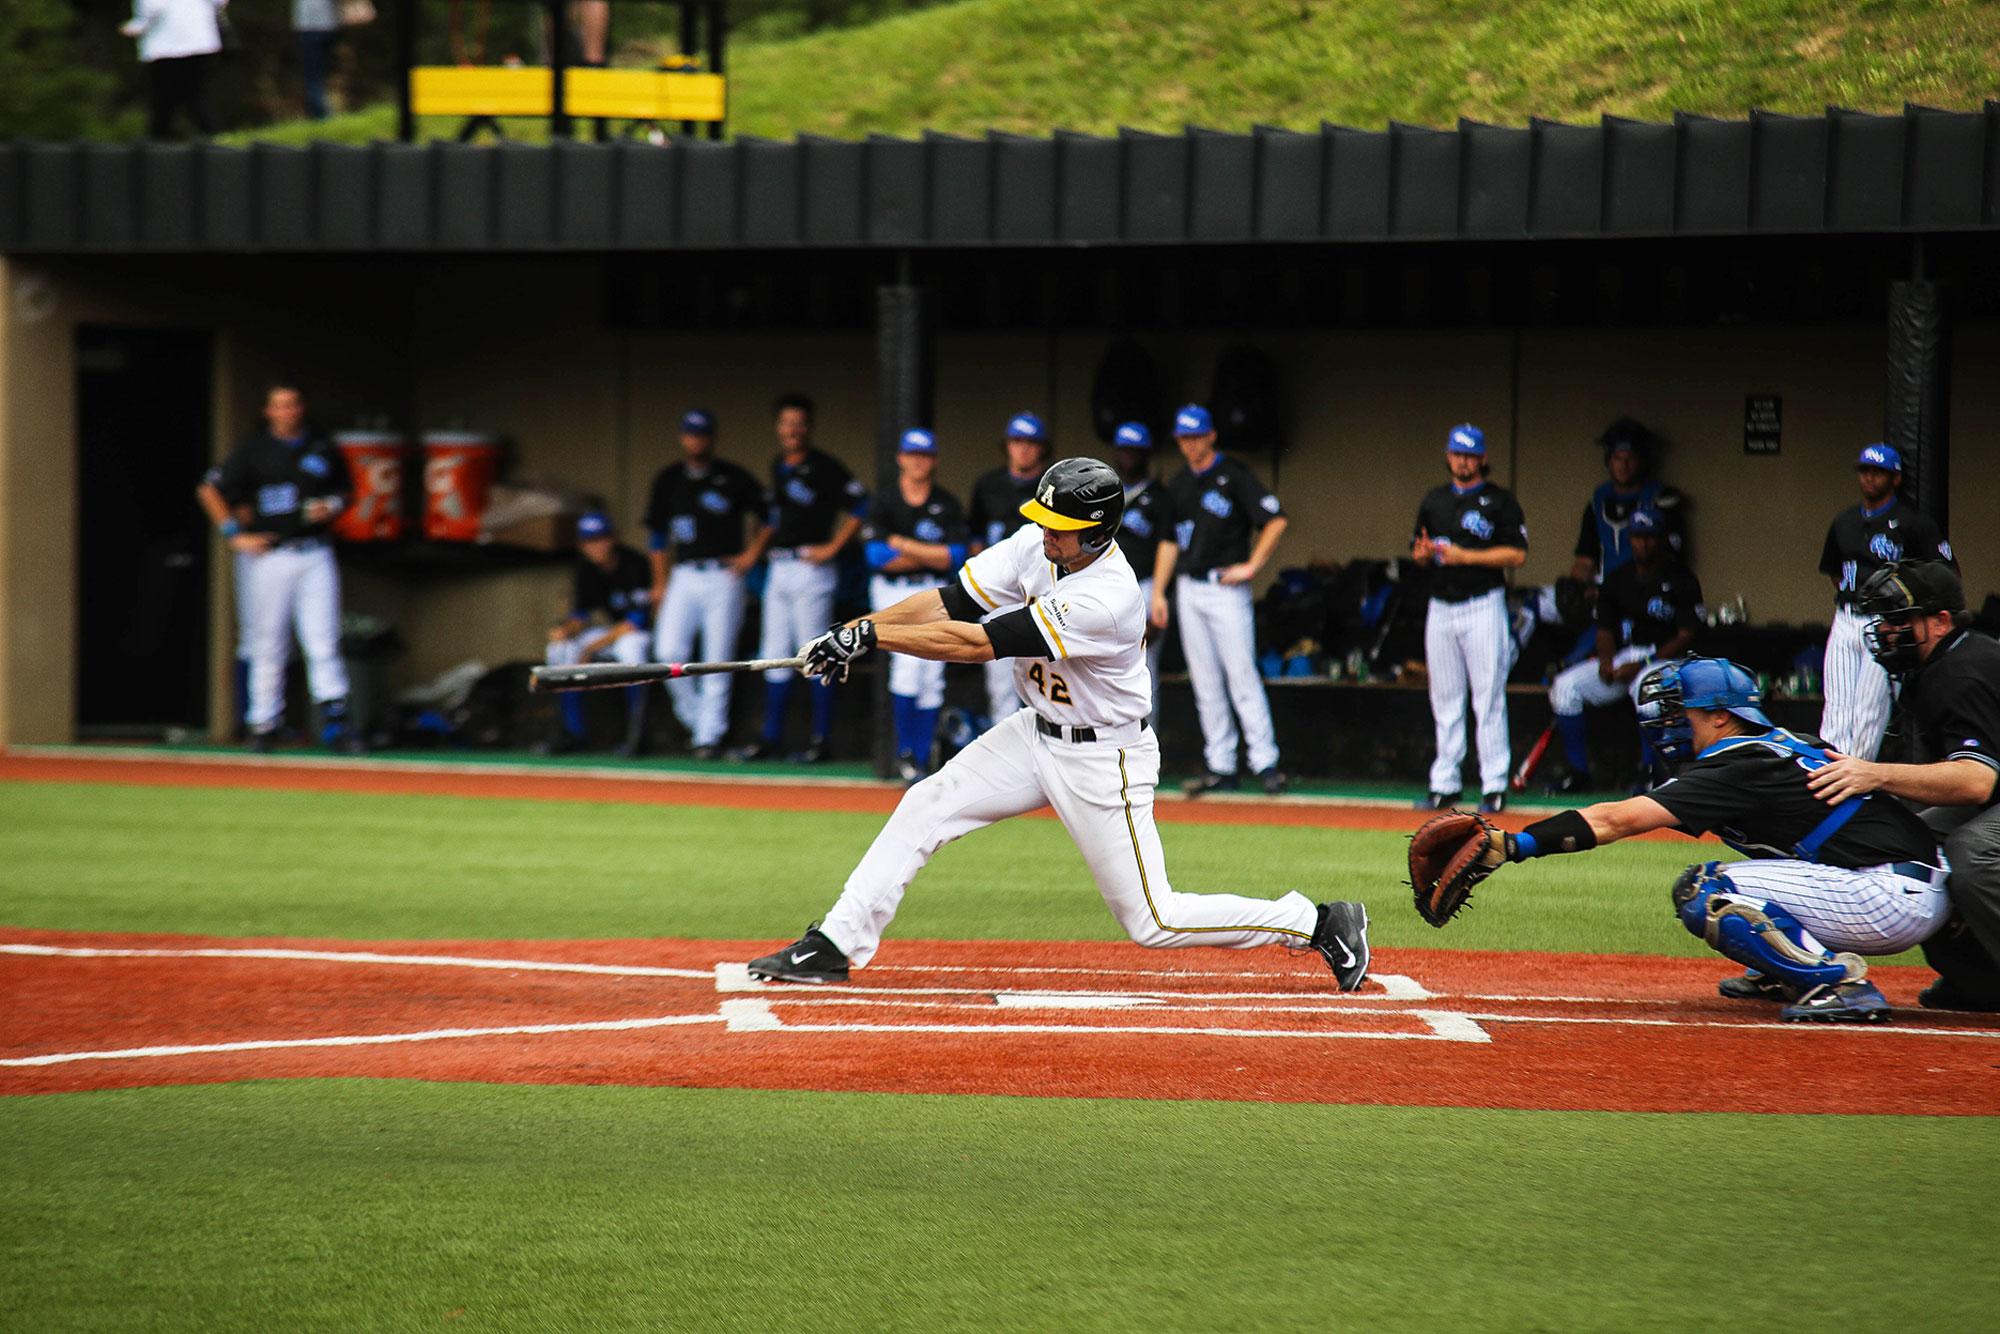 Junior infielder Dillon Dobson follows through on a double against Georgia State in early April. Dobson has hit .406 over the past eight games with seven RBIs. Photo by Gerrit van Genderen  |  The Appalachian